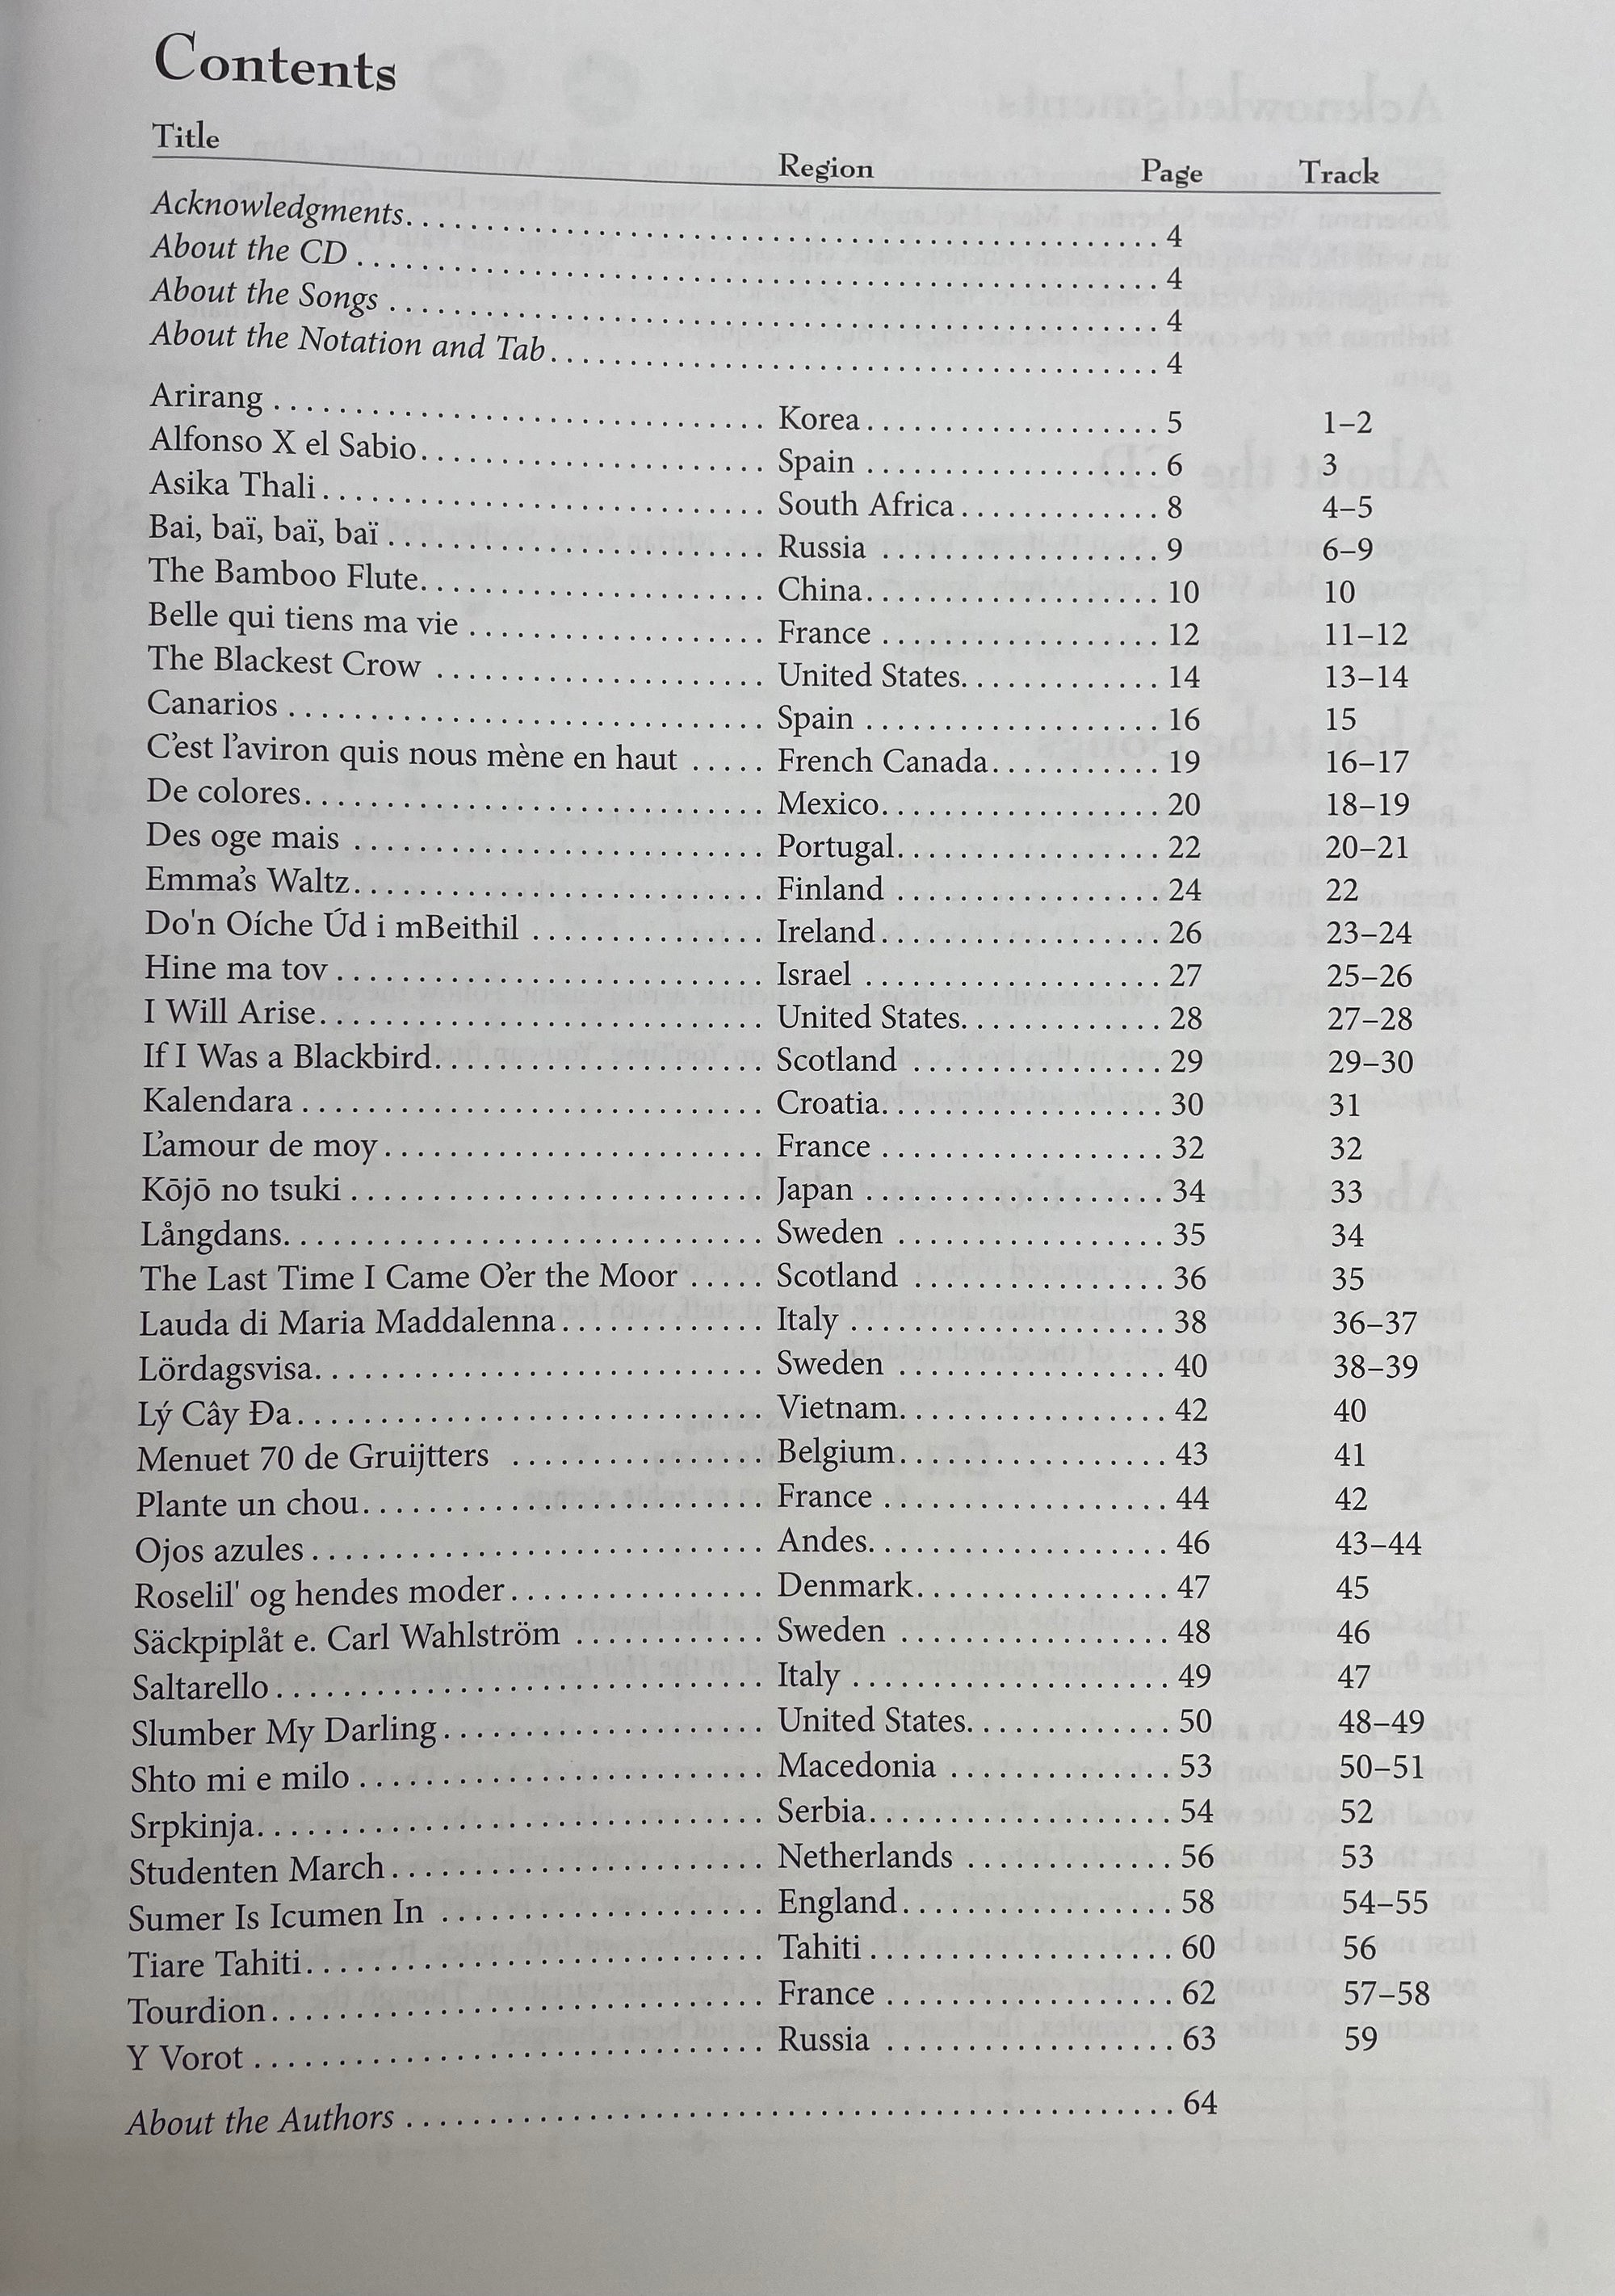 Table of contents from "Music of the World for Mountain Dulcimer" by Neal Hellman and Janet Herman listing musical compositions for the mountain dulcimer along with their respective regions, track numbers, and tablature.